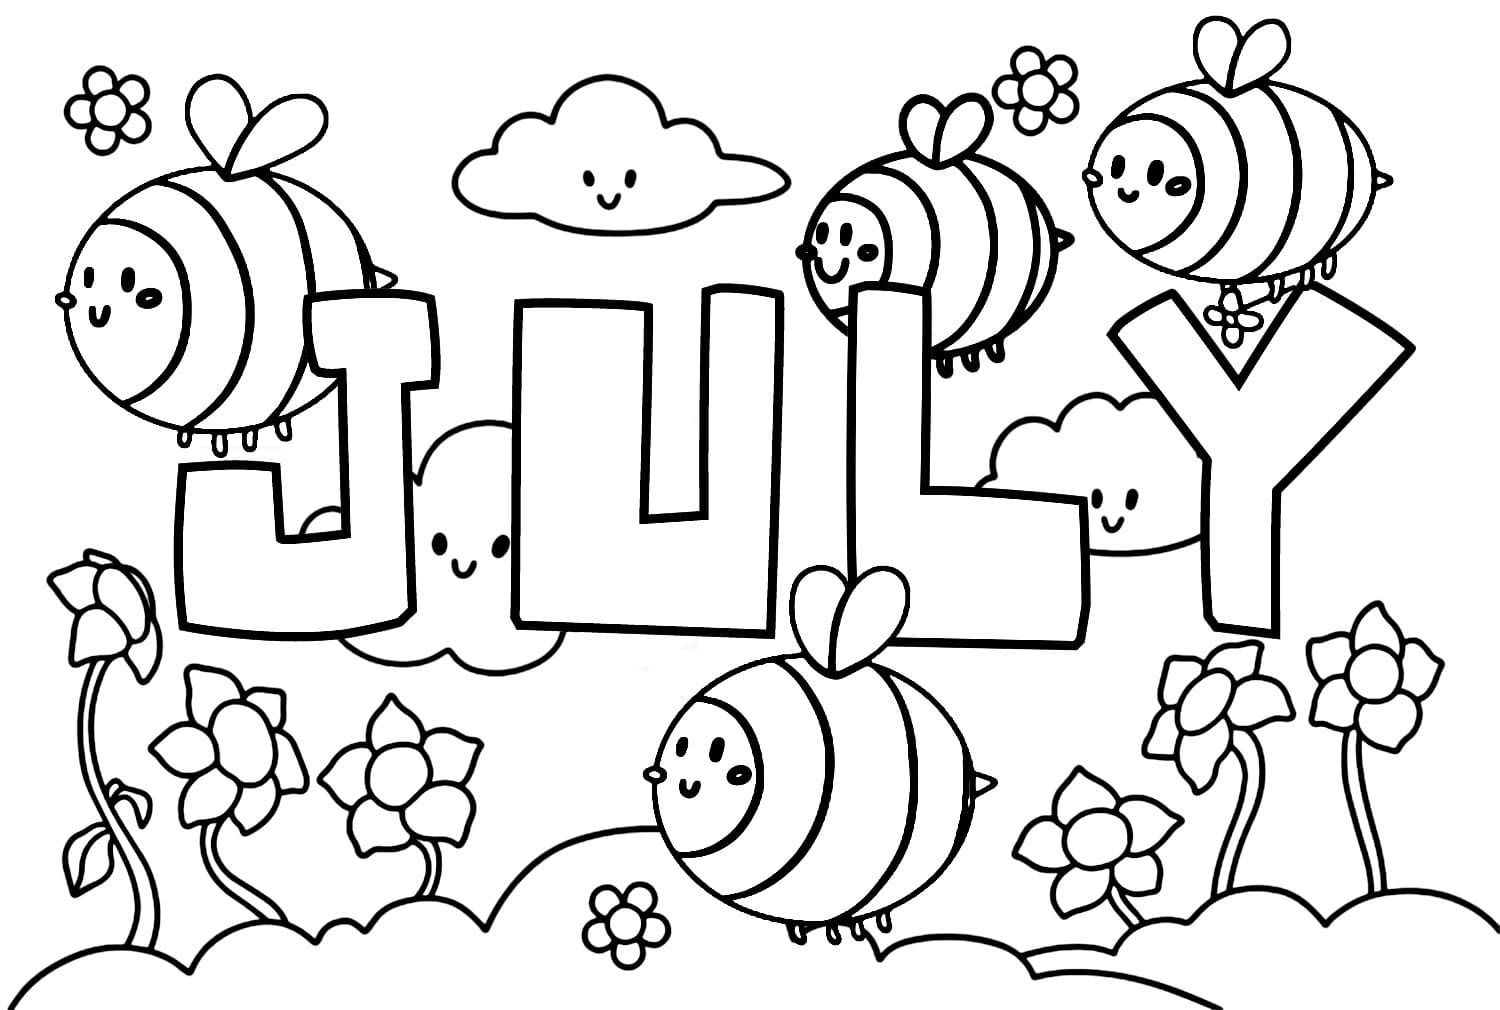 Cute July coloring page - Download, Print or Color Online for Free